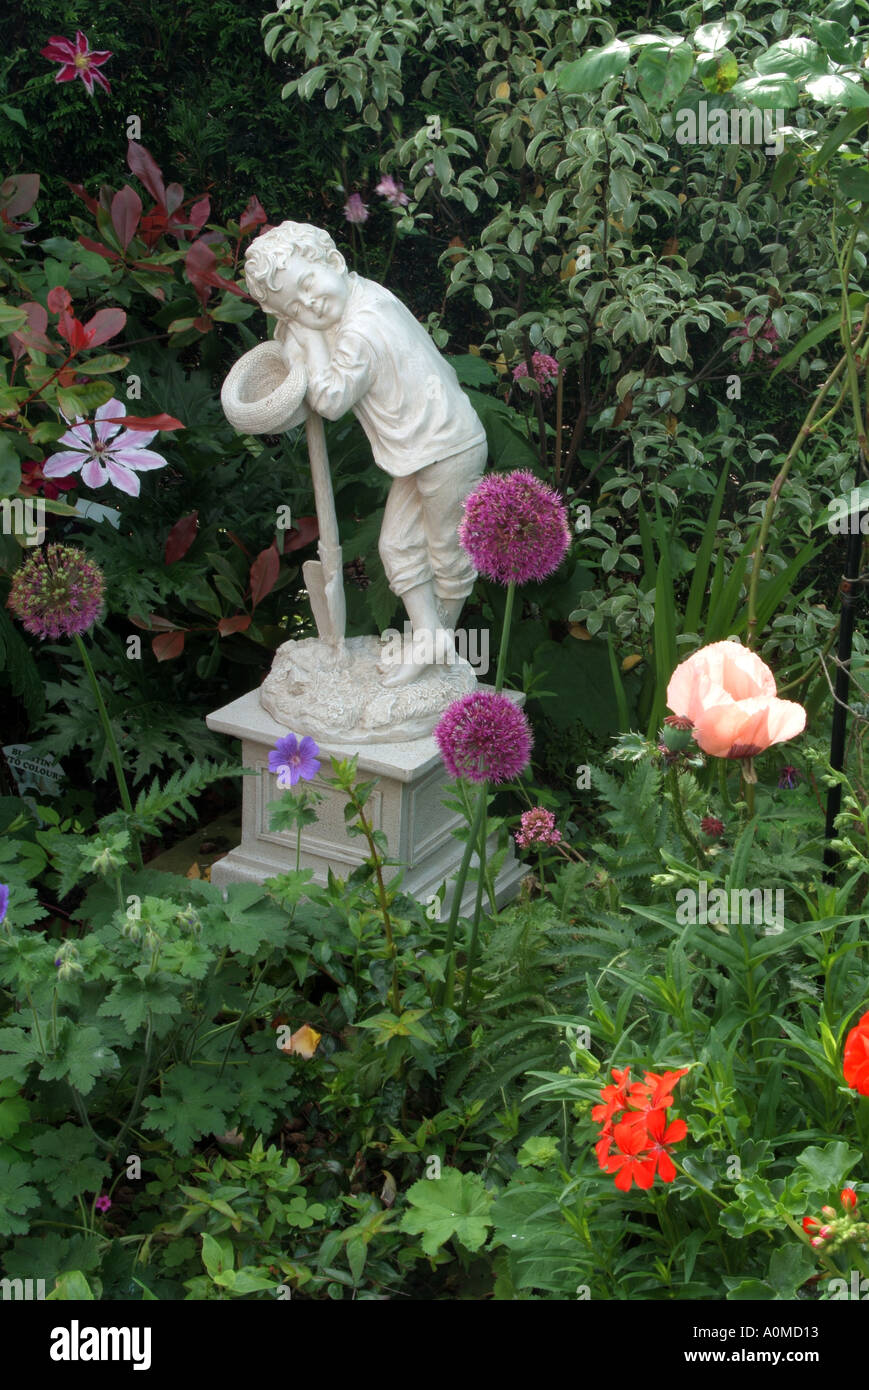 Garden ornament set amongst Poppies Perenial Geraniums Clematis Alliums and general greenery Stock Photo